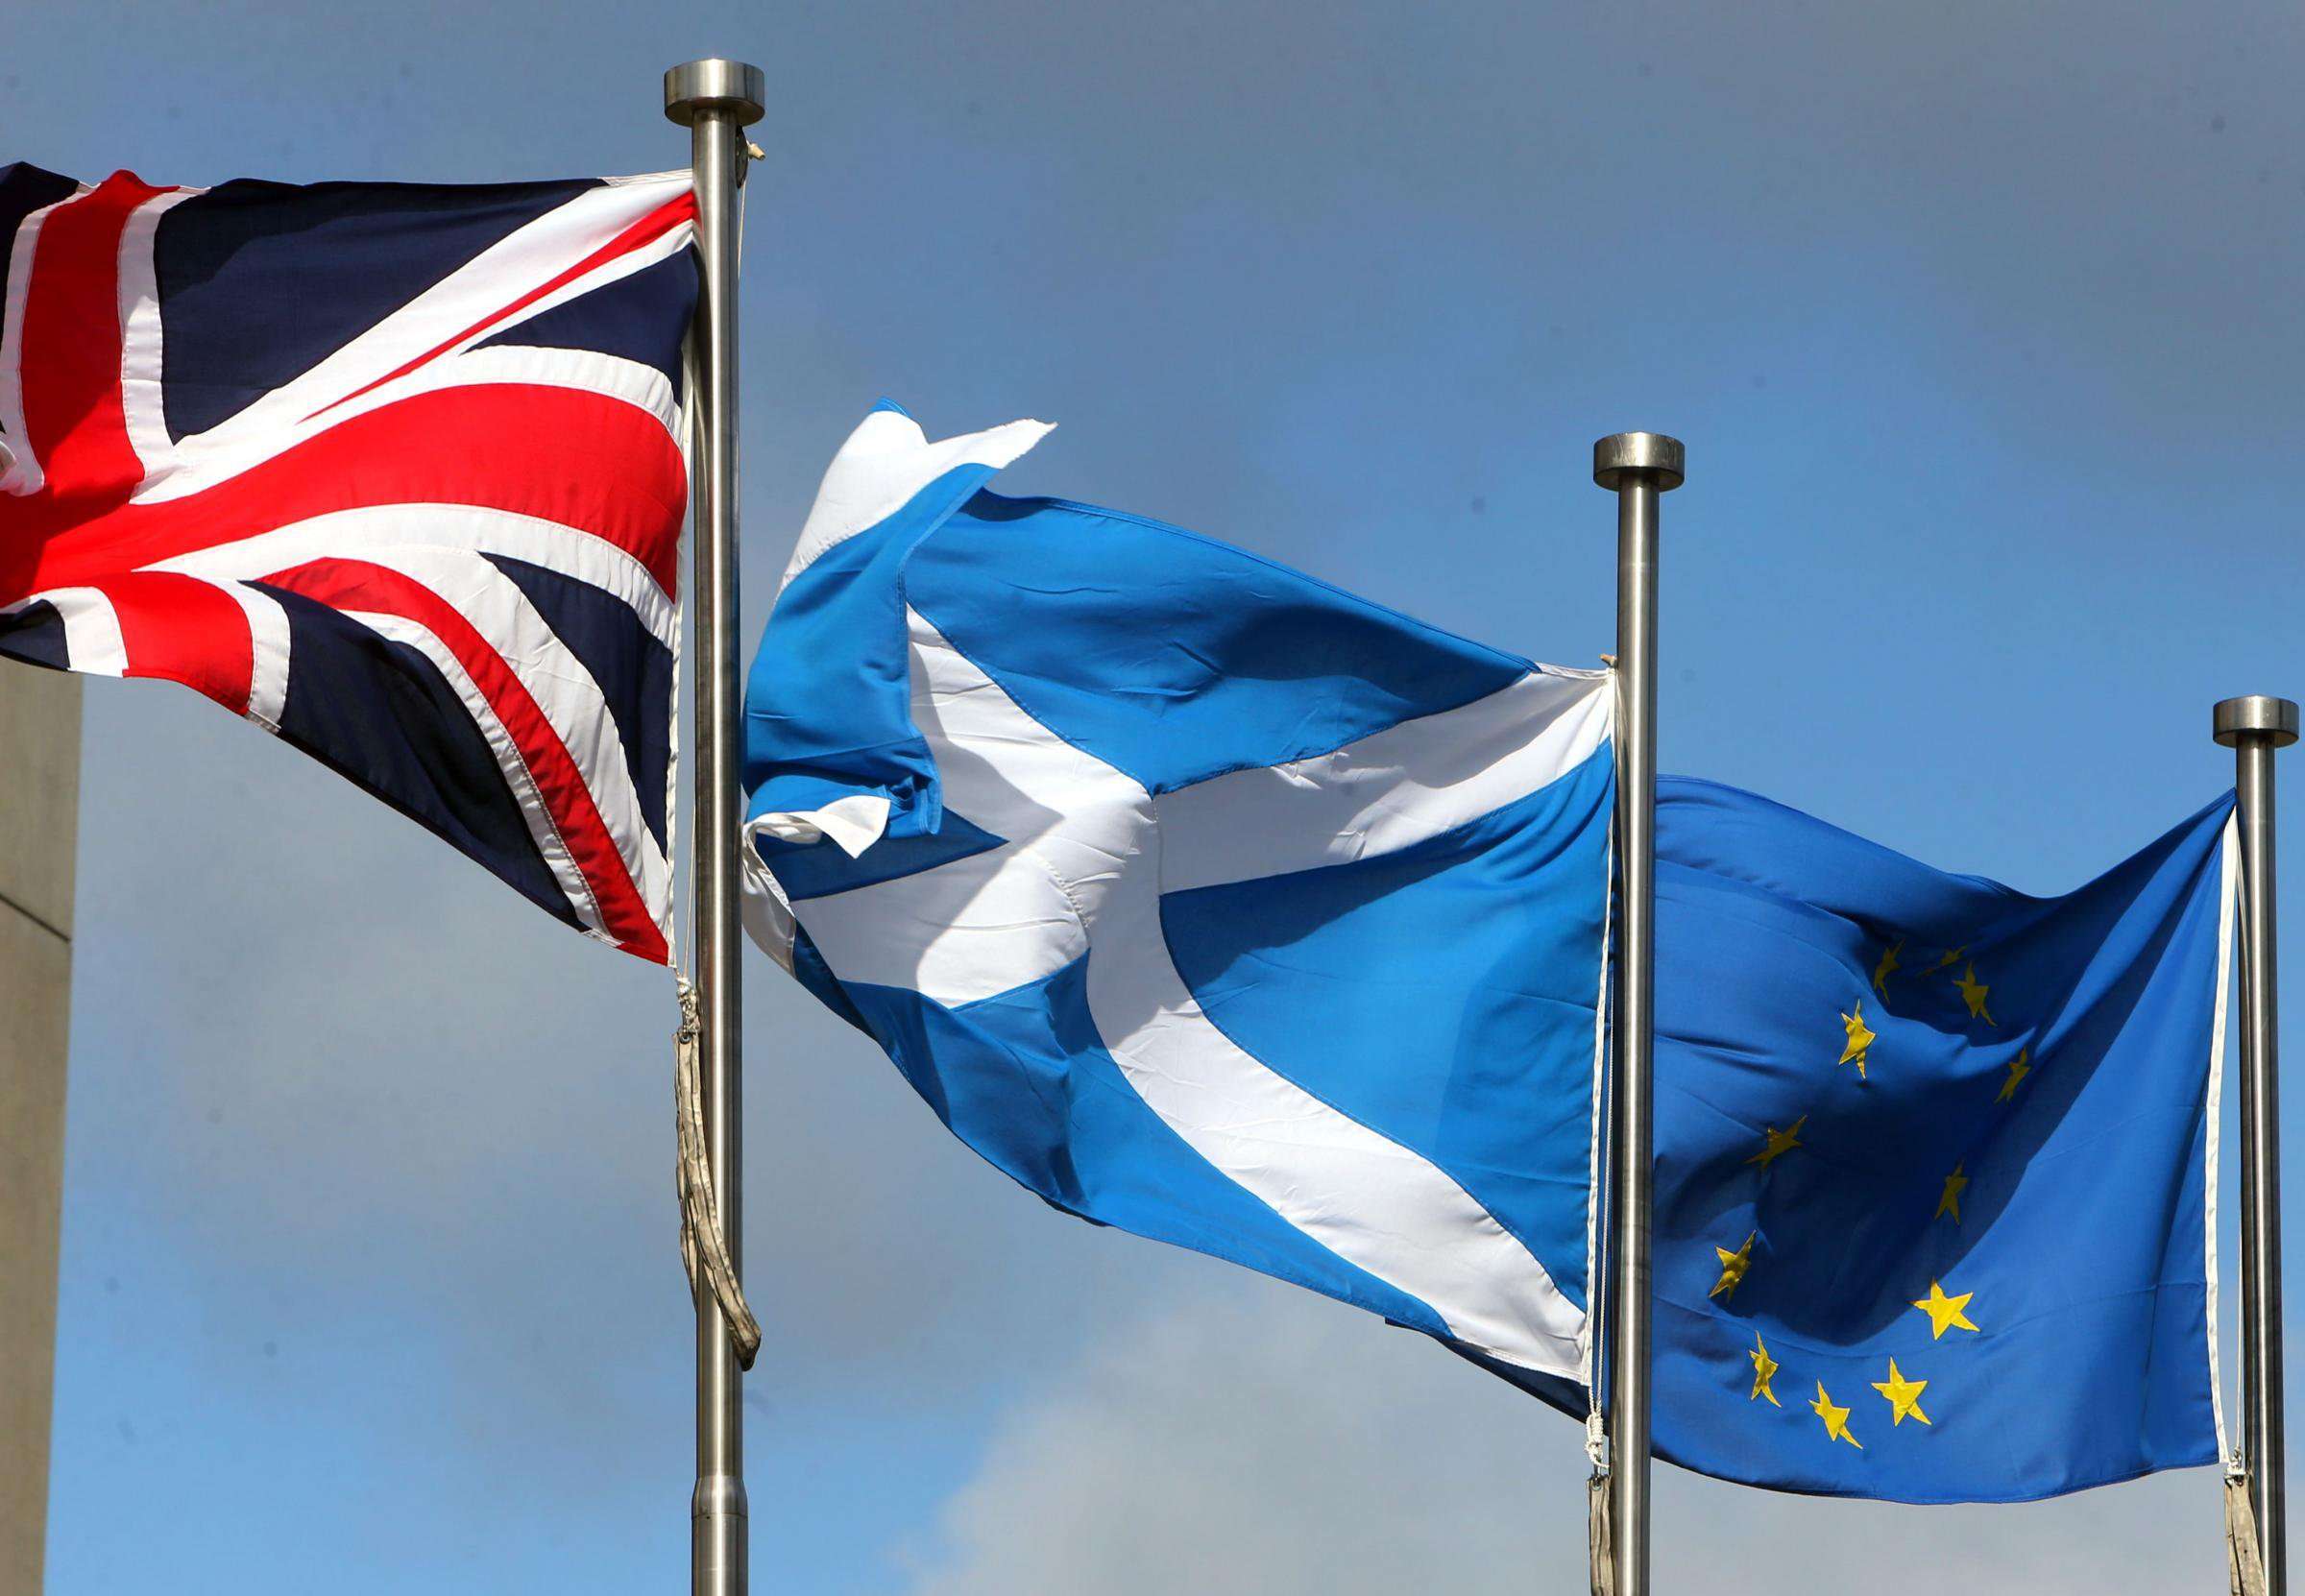 image for Scotland move to join EU has to be 'seriously considered', says Van Rompuy